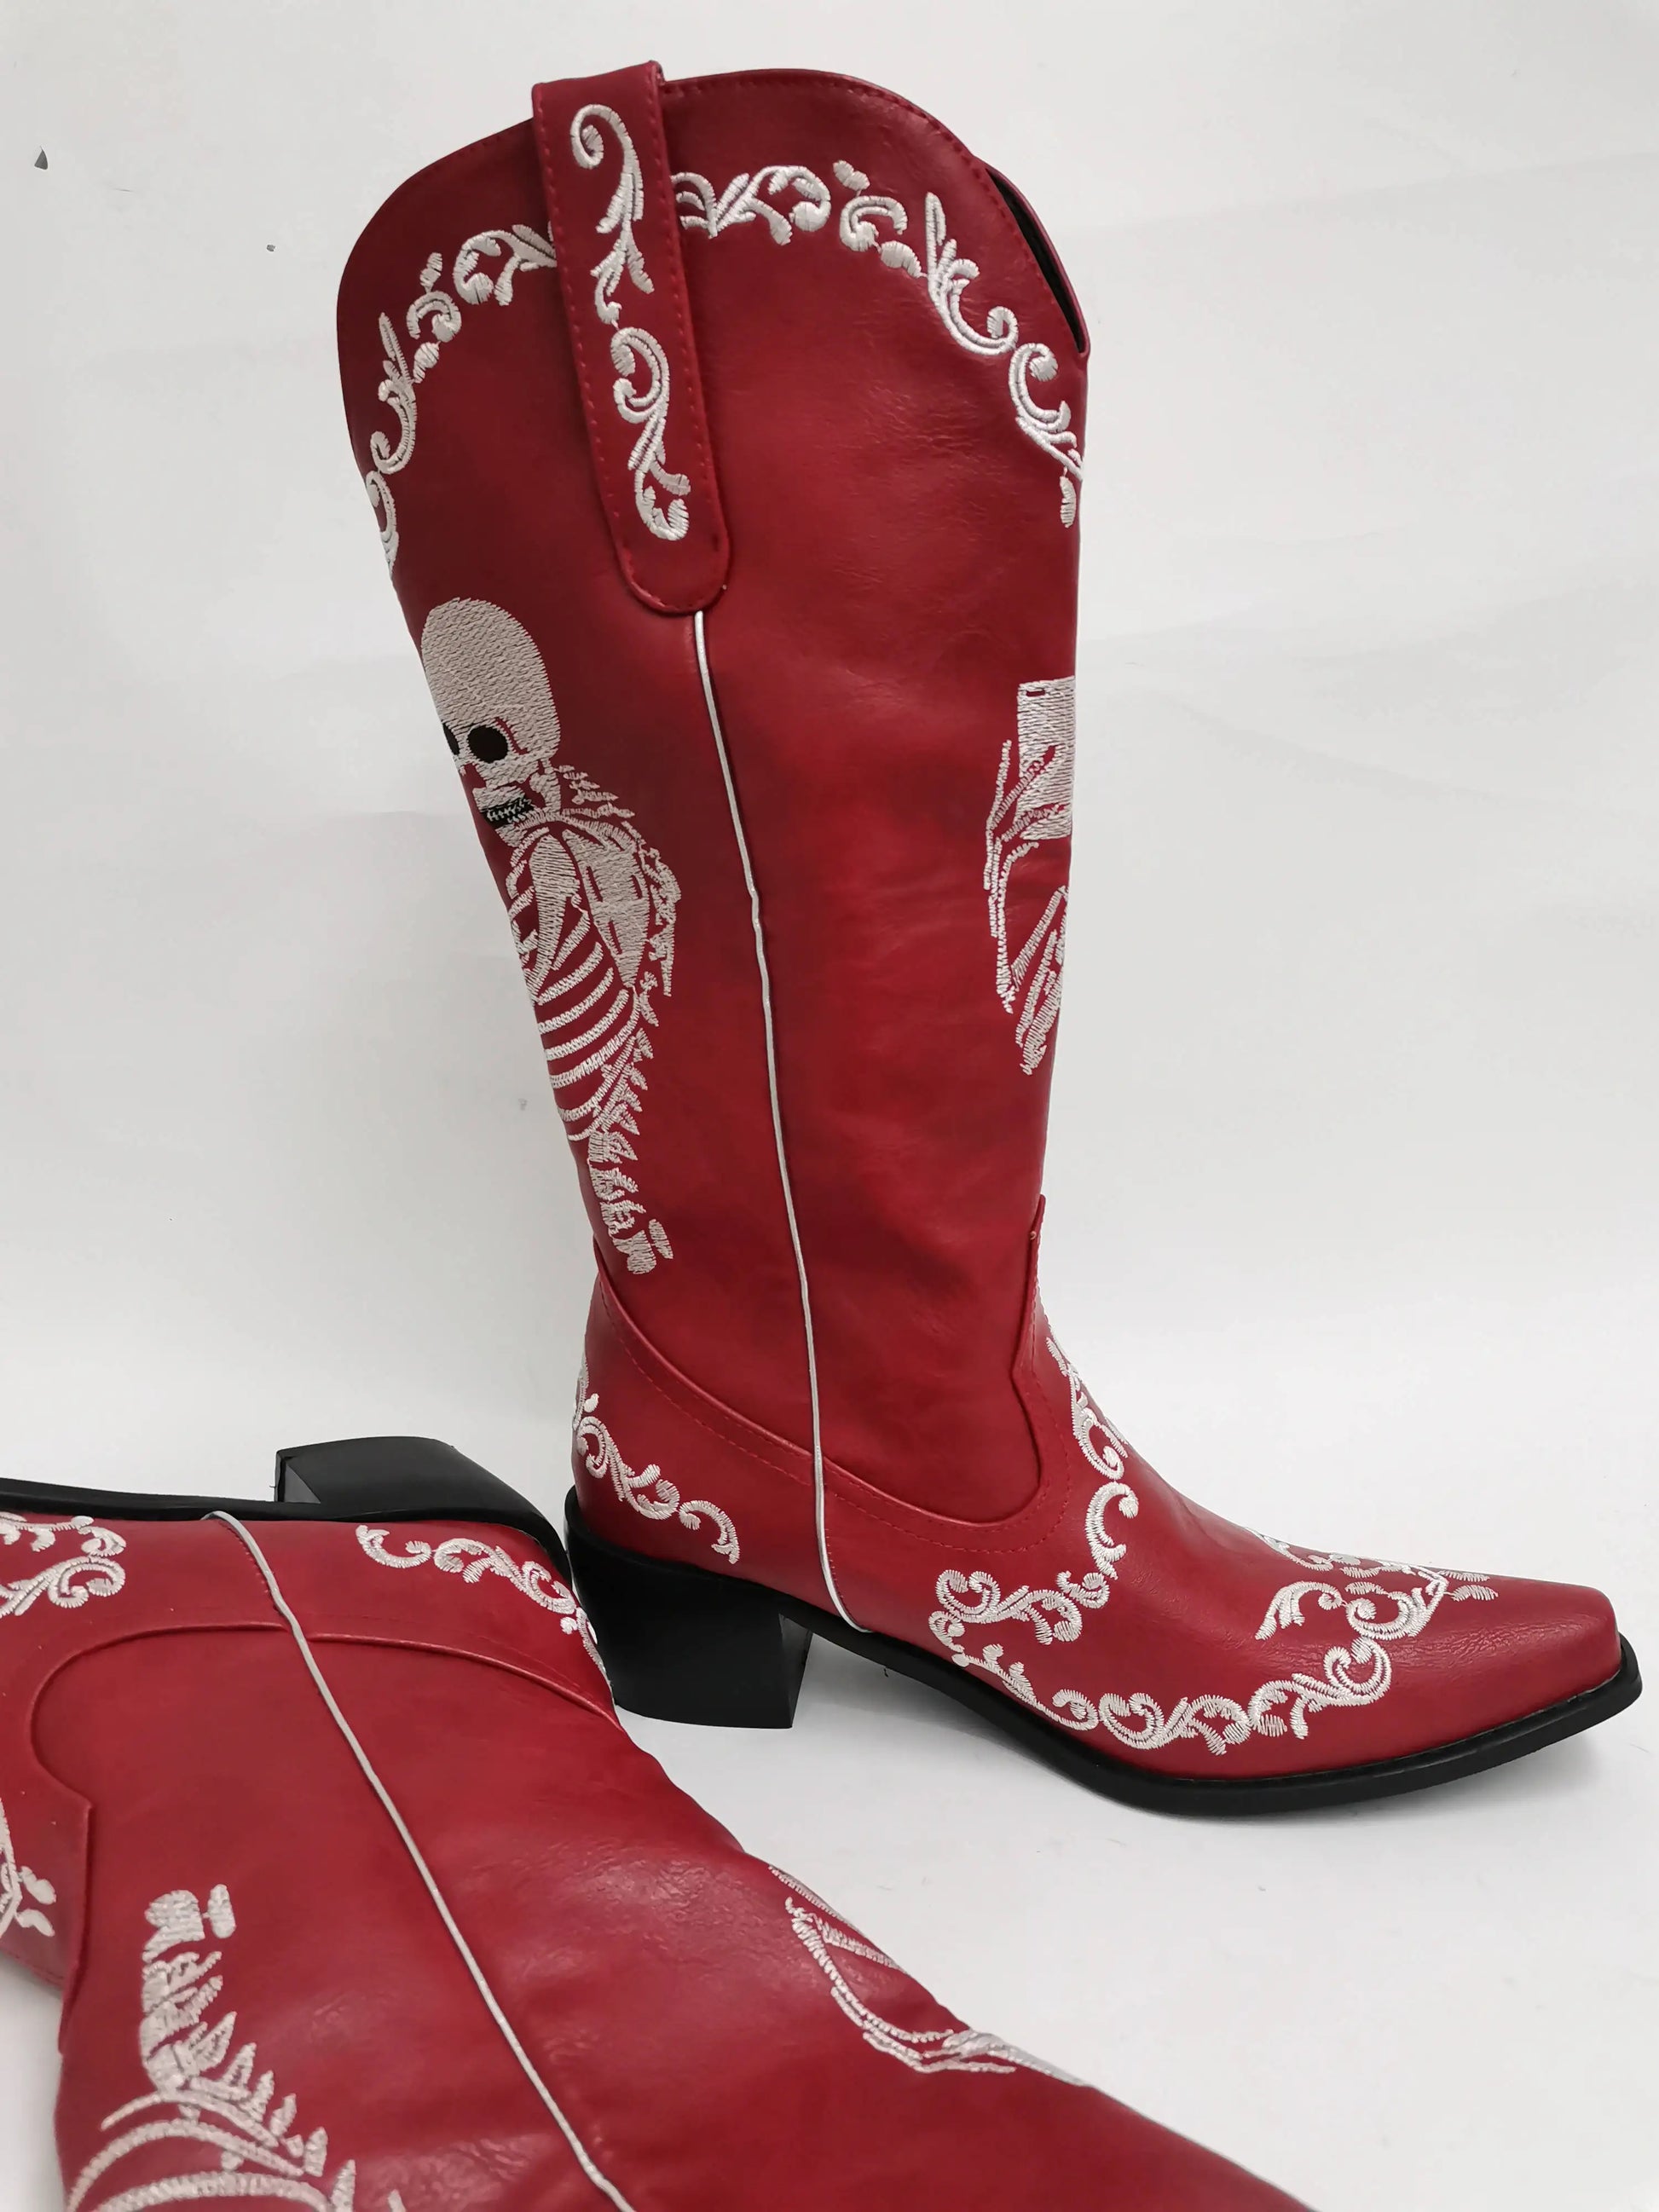 Red boot detail